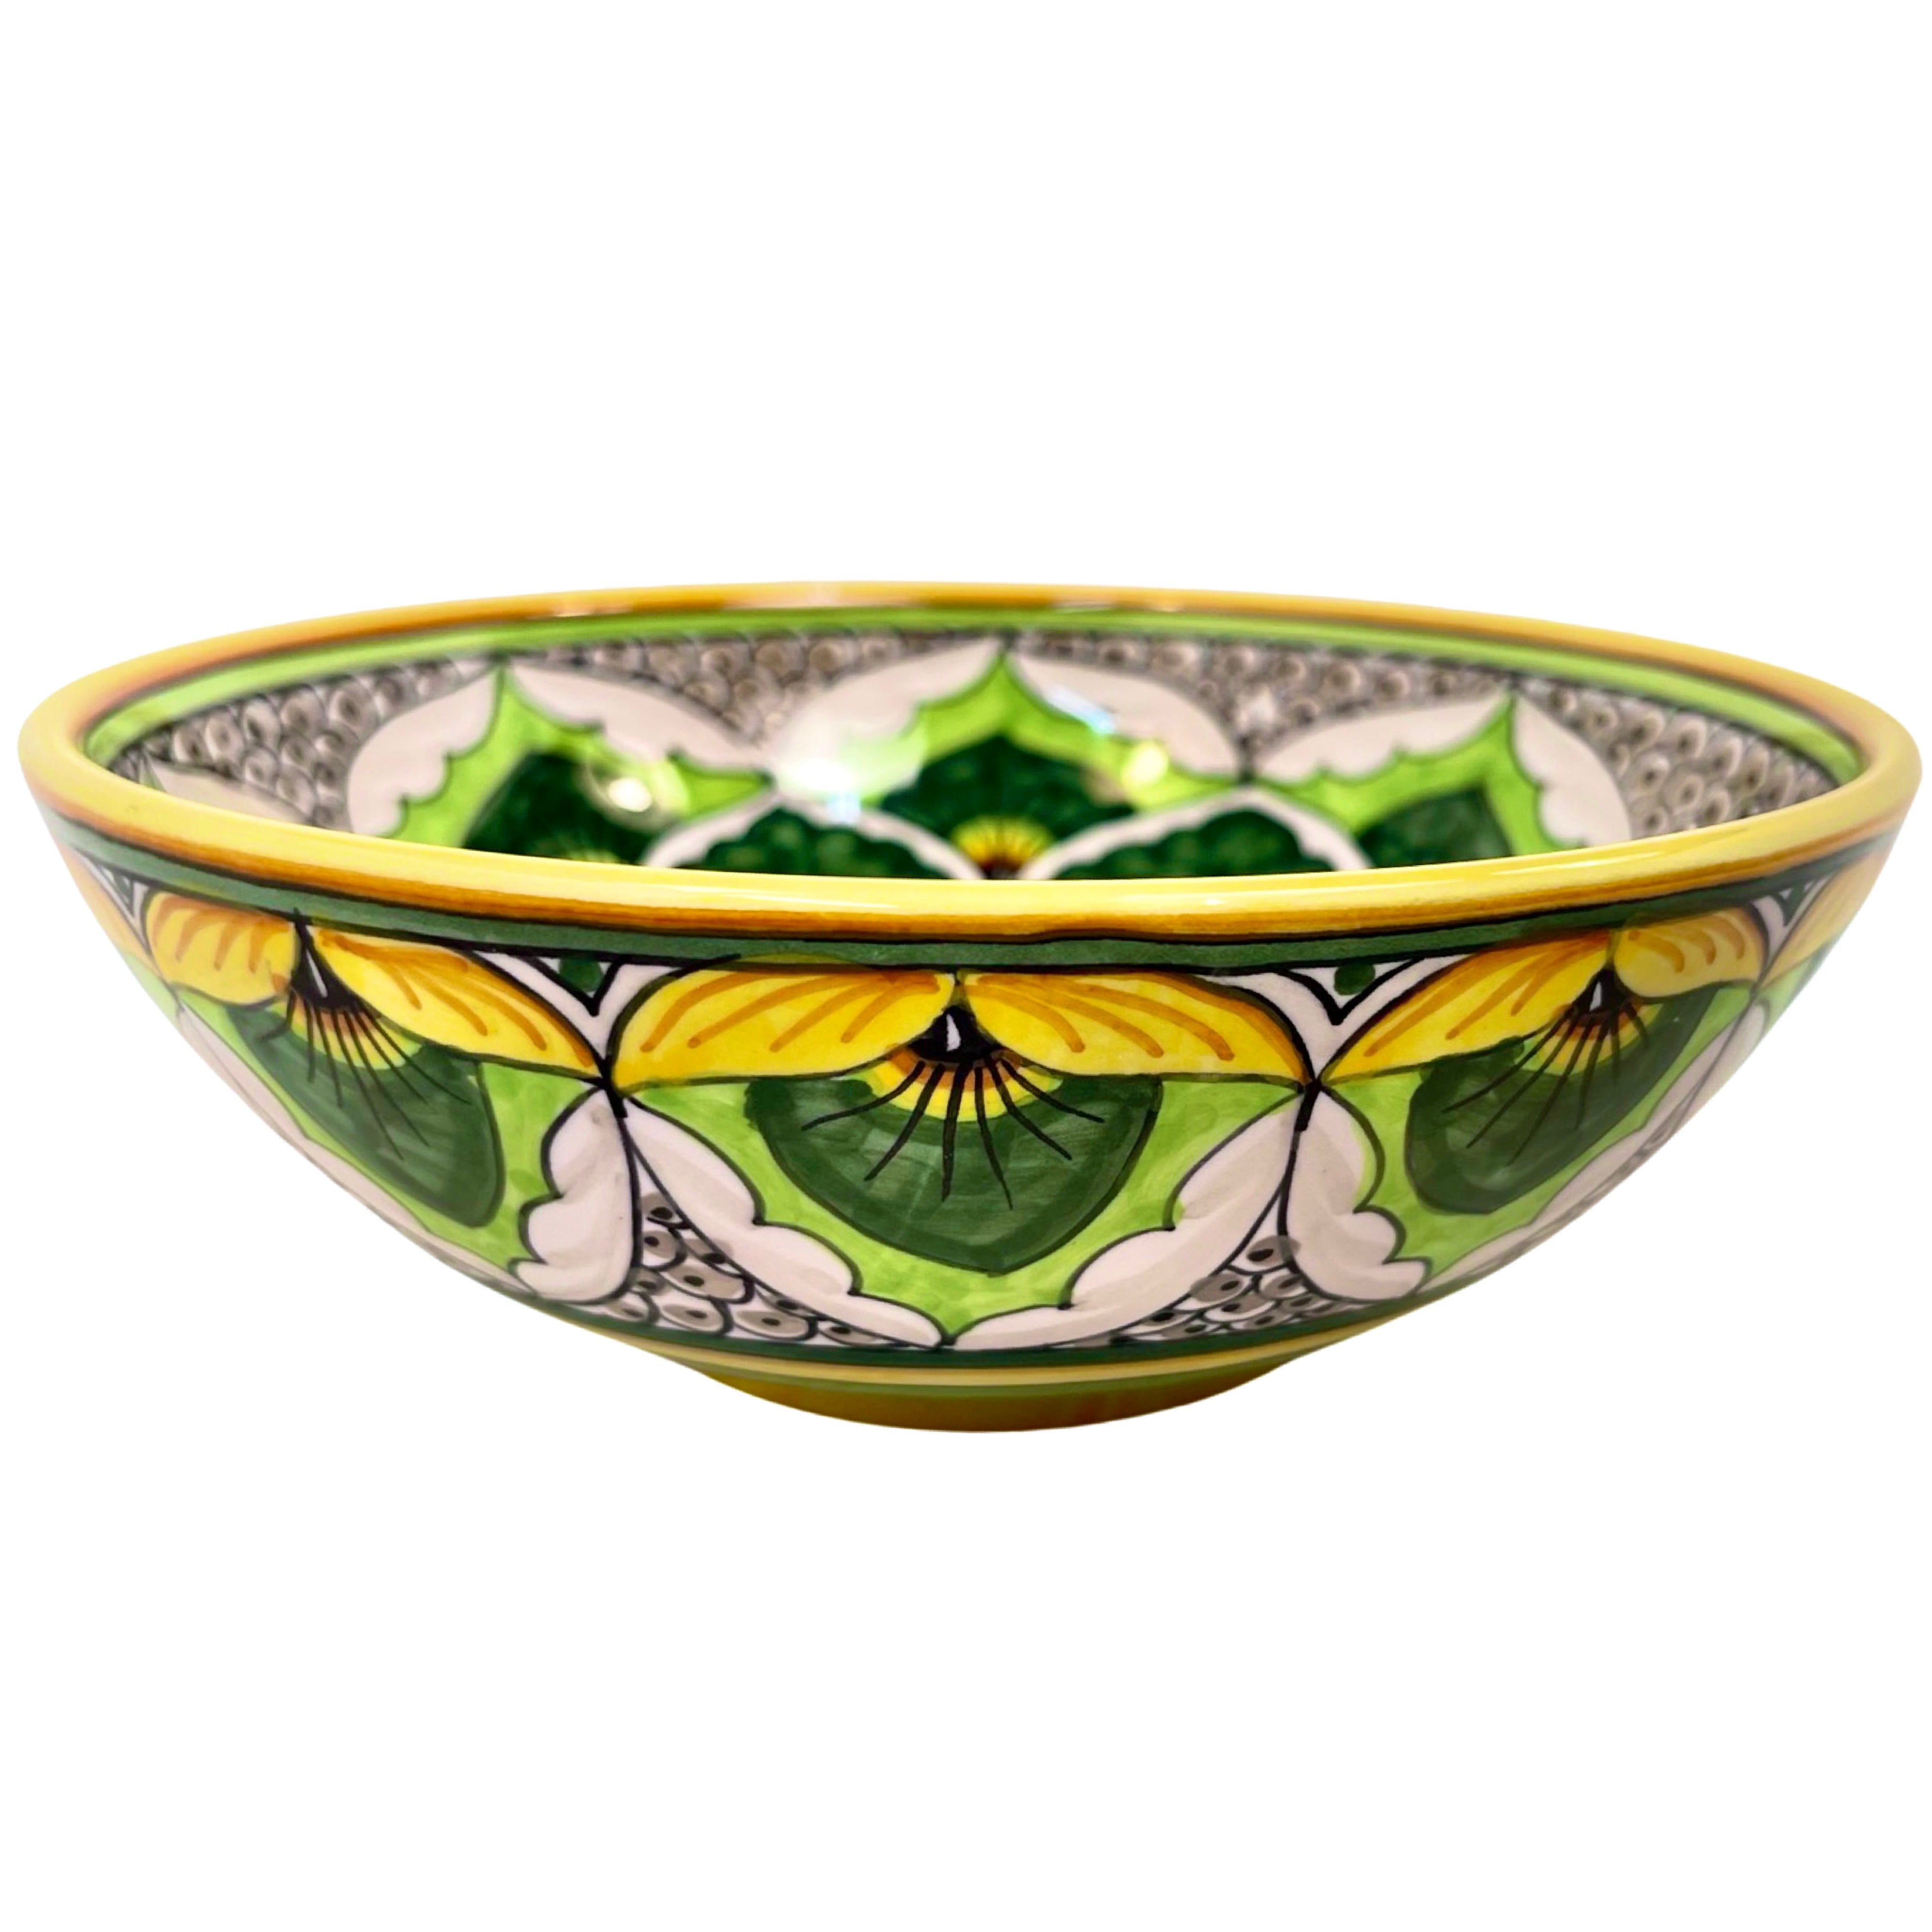 Geribi Poke Bowl (PG13) Green Peacock Design, ceramics, pottery, italian design, majolica, handmade, handcrafted, handpainted, home decor, kitchen art, home goods, deruta, majolica, Artisan, treasures, traditional art, modern art, gift ideas, style, SF, shop small business, artists, shop online, landmark store, legacy, one of a kind, limited edition, gift guide, gift shop, retail shop, decorations, shopping, italy, home staging, home decorating, home interiors